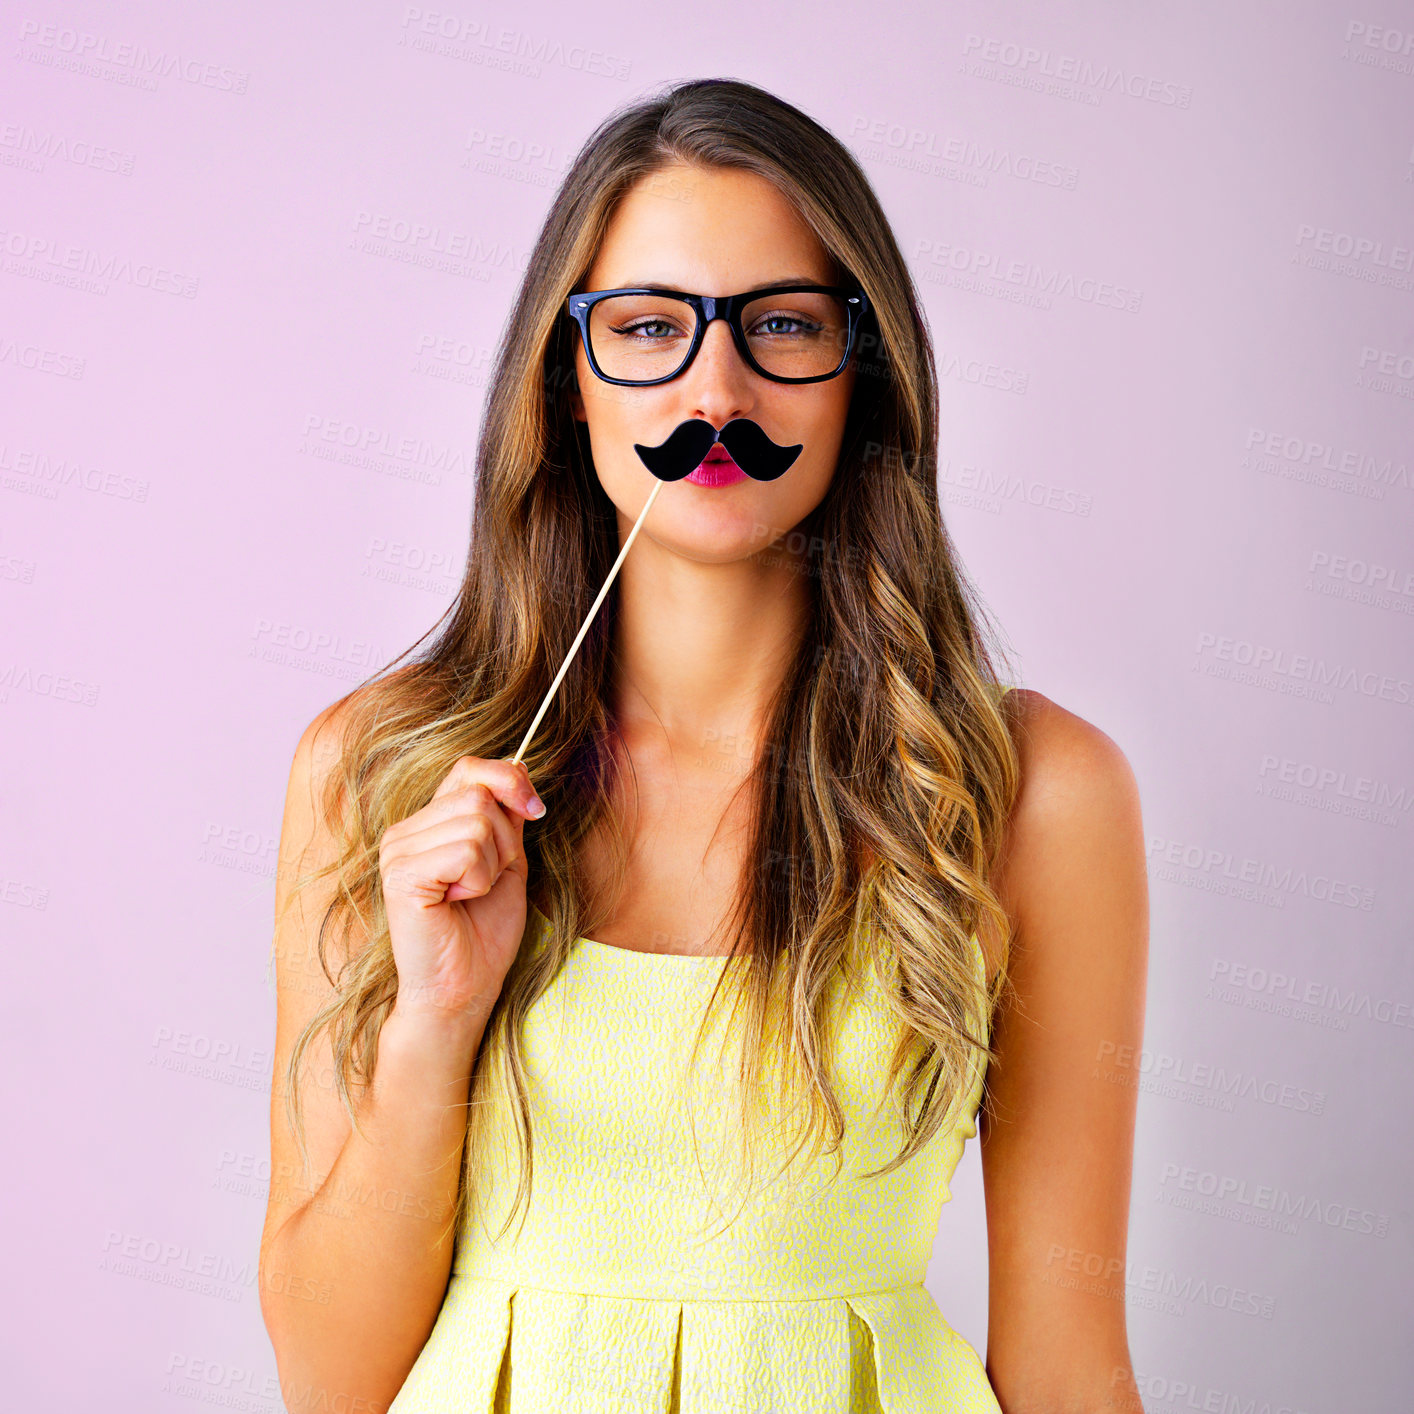 Buy stock photo Studio shot of a young woman holding a mustache prop to her face against a pink background